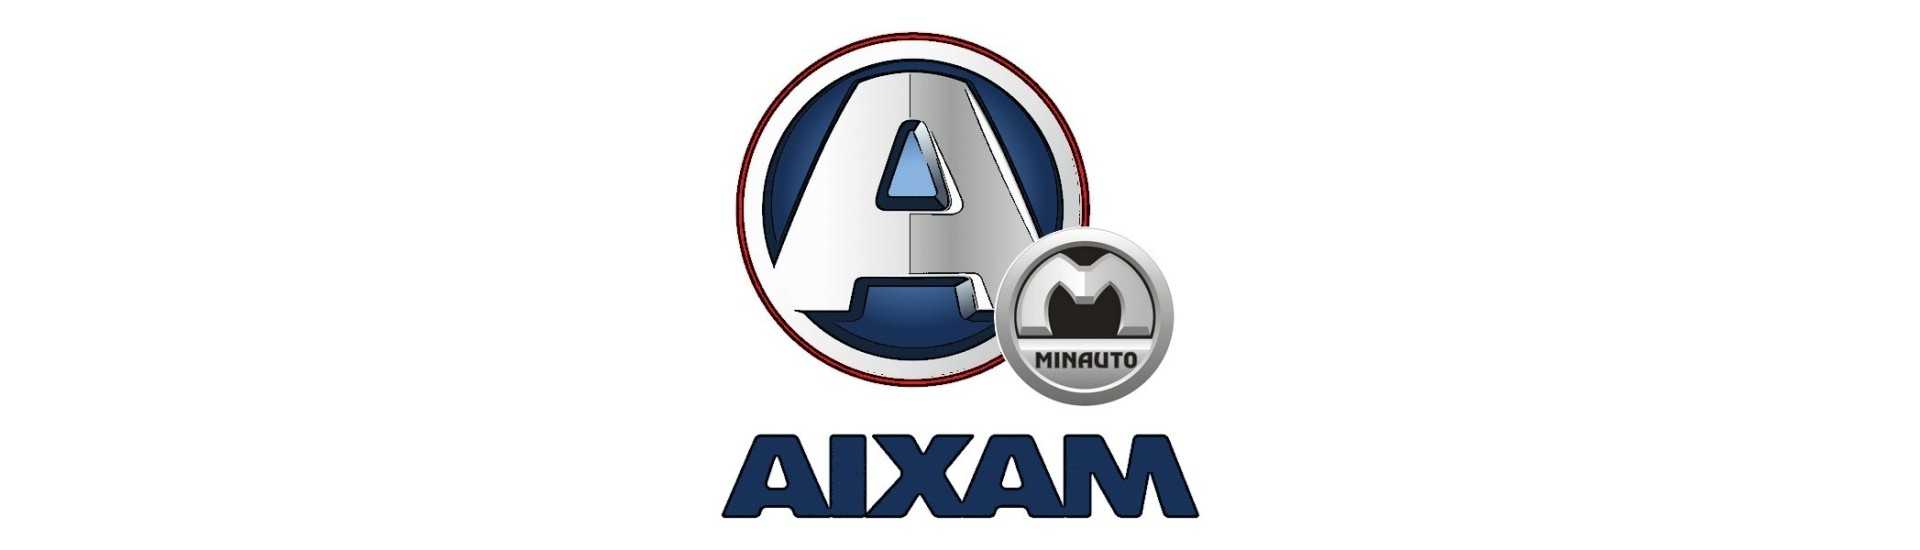 Painting dyed car manufacturer without license Aixam Minauto